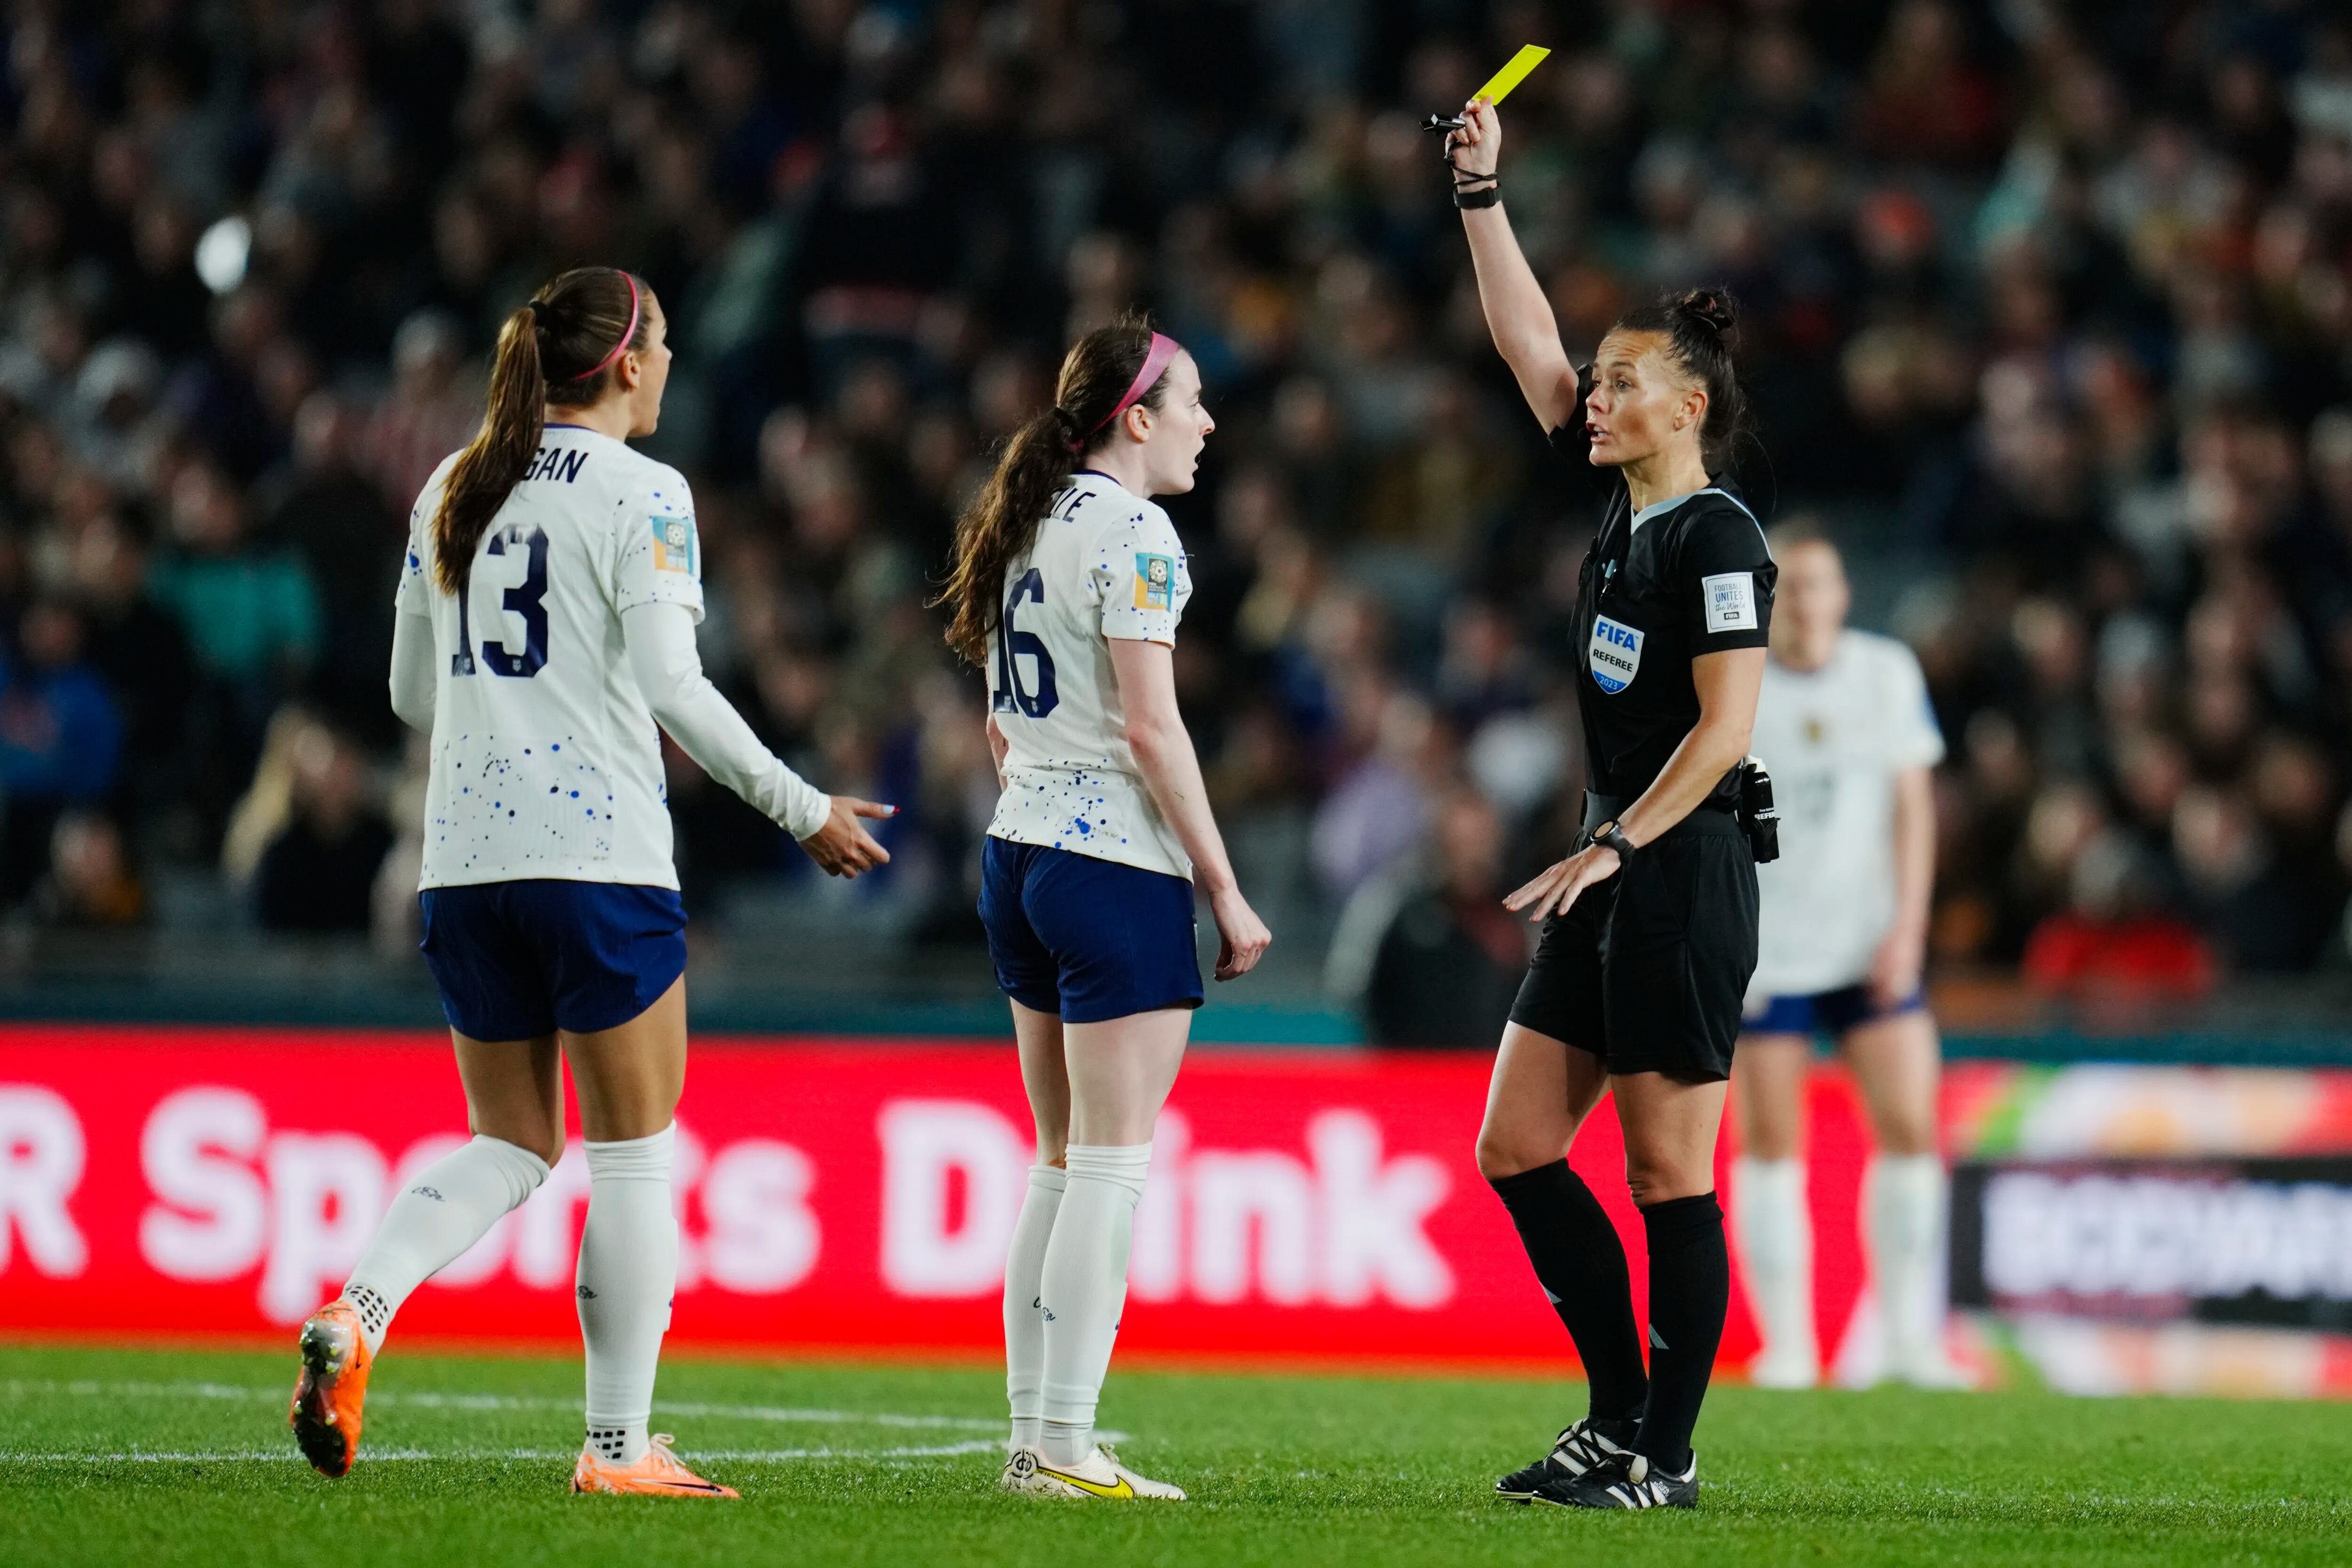 Rose Lavelle's yellow card against Portugal means she's suspended for the U.S.' round of 16 game against Sweden.